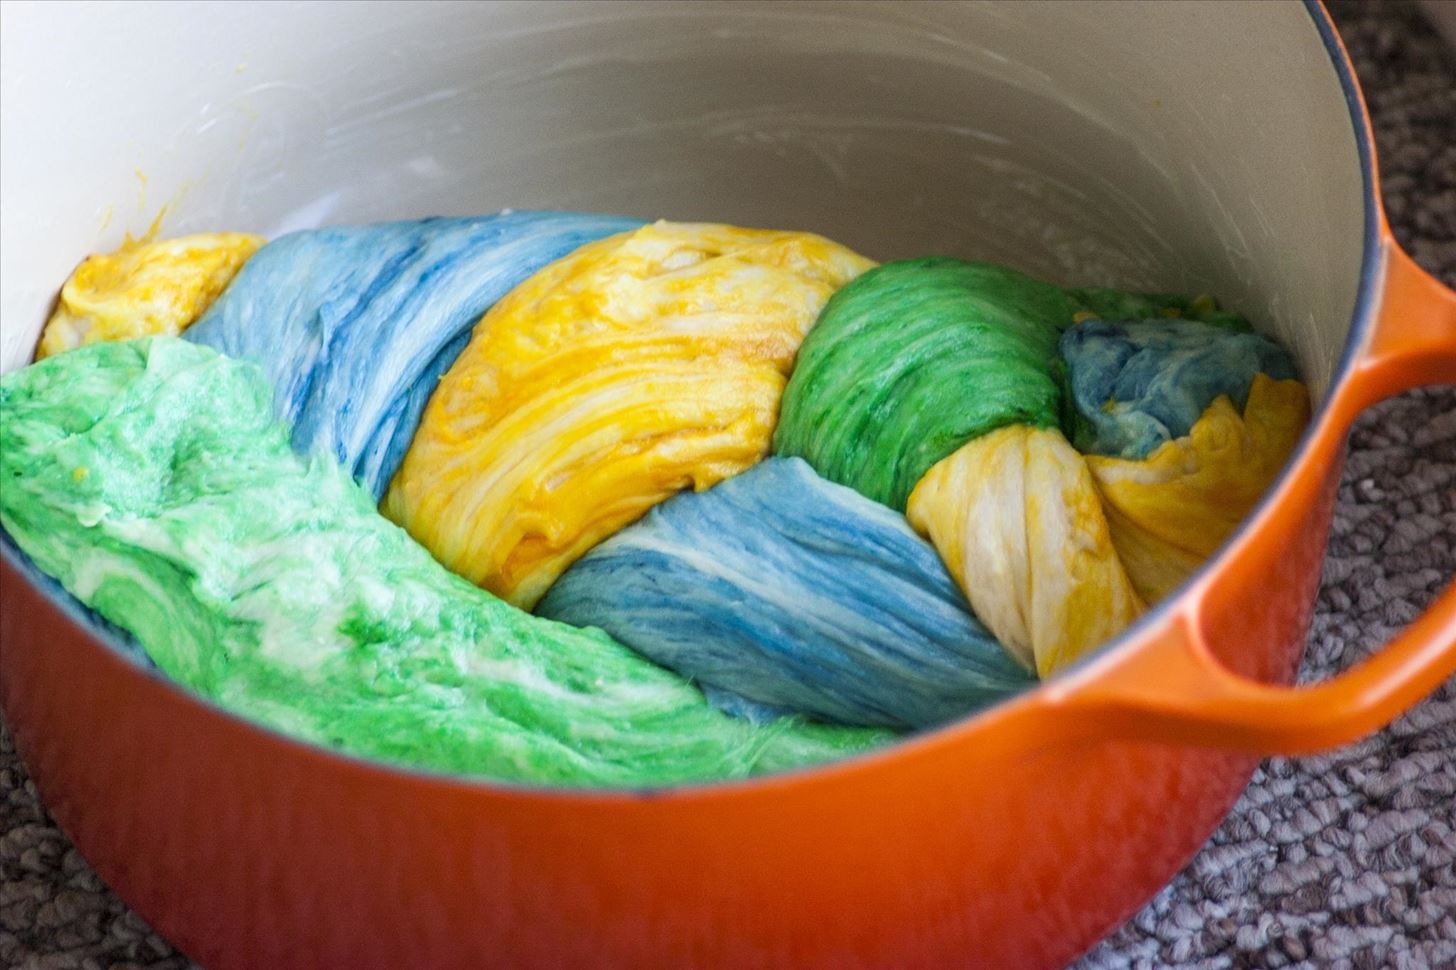 How to Make Super Colorful Bread for One-of-a-Kind Ice Cream Sandwiches